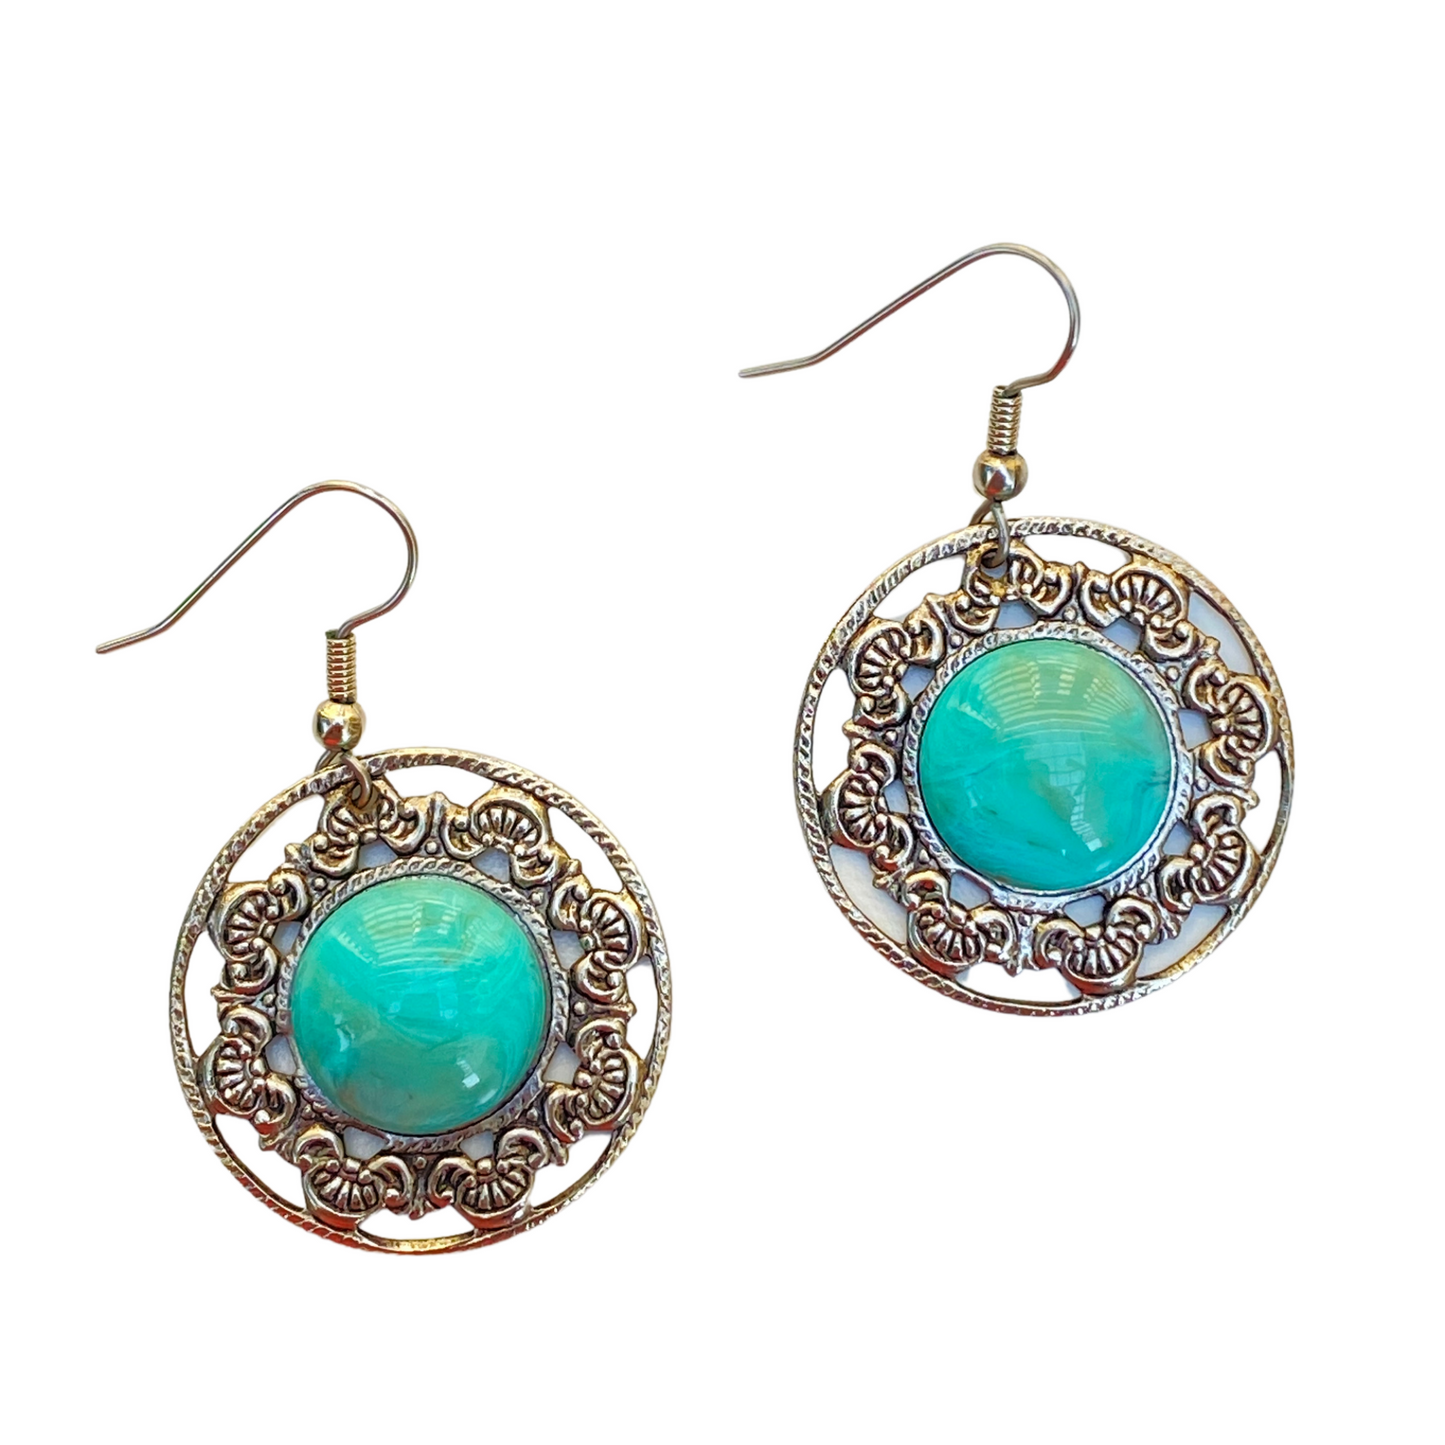 Round Silver Lace | Large Turquoise Cabochon